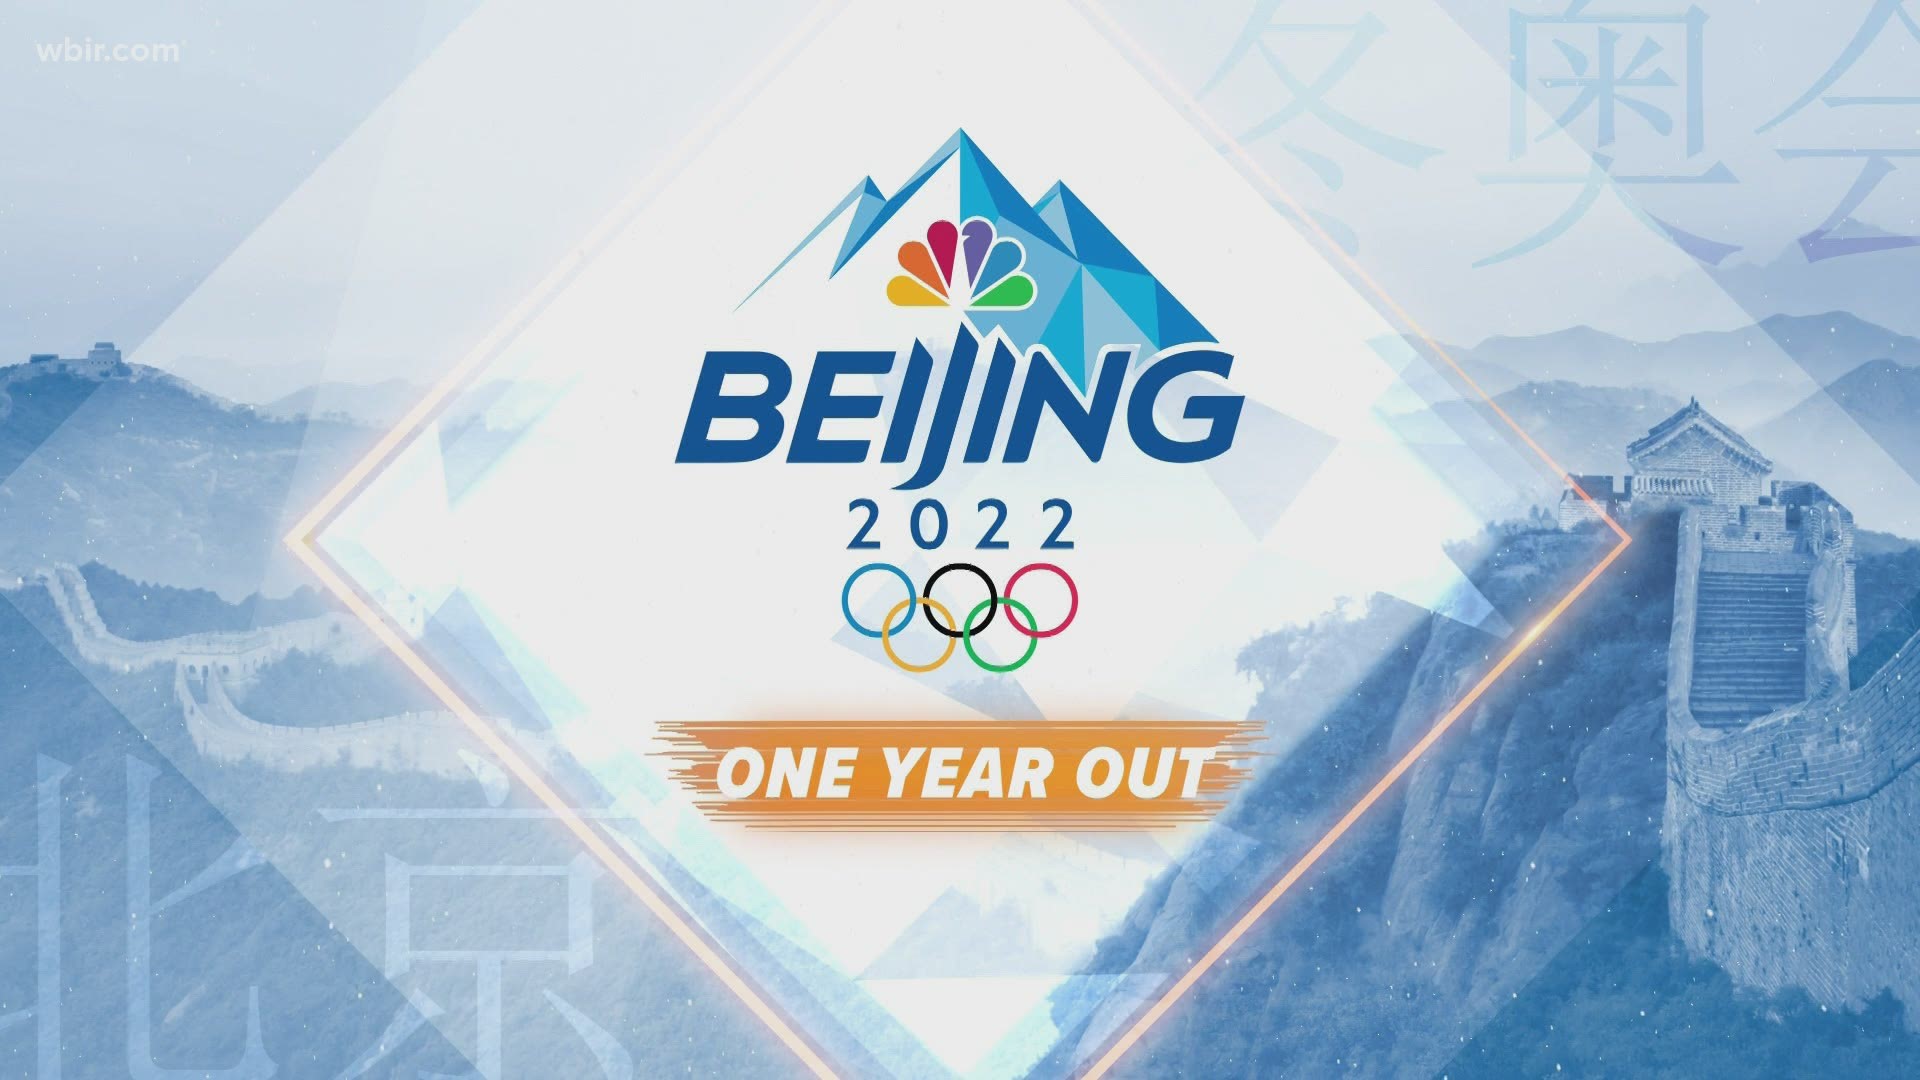 On Feb. 4, 2021, we are one year away from the 2022 Beijing Olympics.